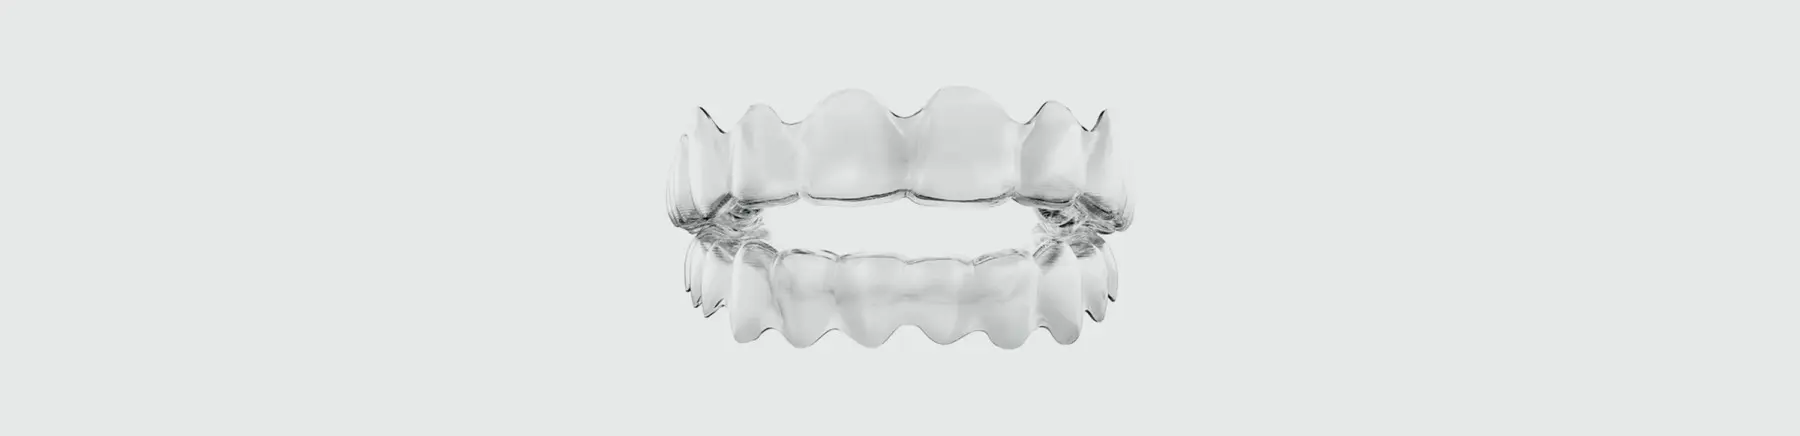 Maintaining Your Smile: The Importance of Retainers After Orthodontic Treatment